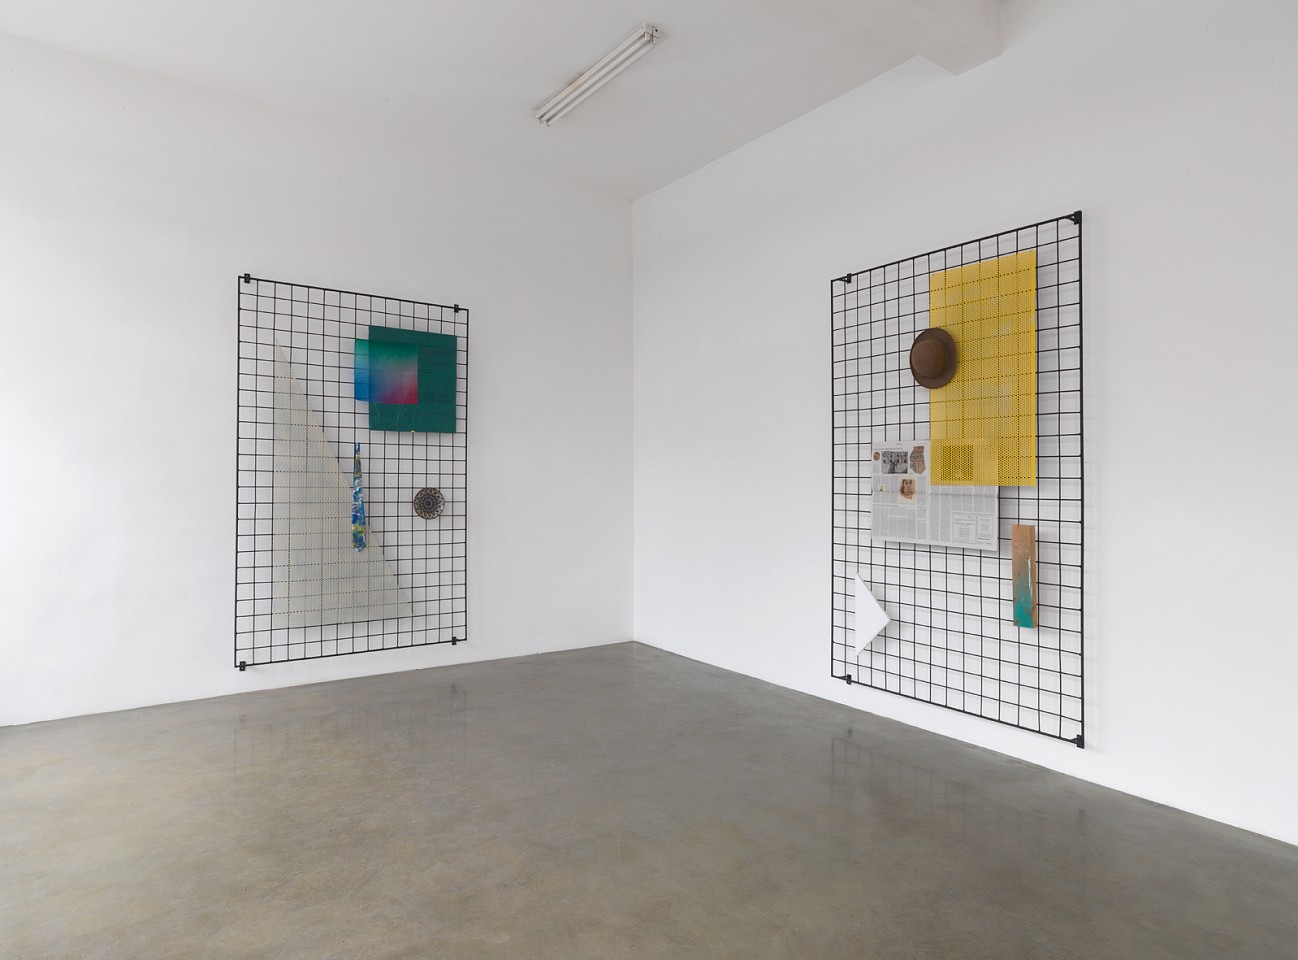 Eva Berendes
Grids, 2013
steel, lacquer, mixed media, 98 2/5 x 59 1/10 in.